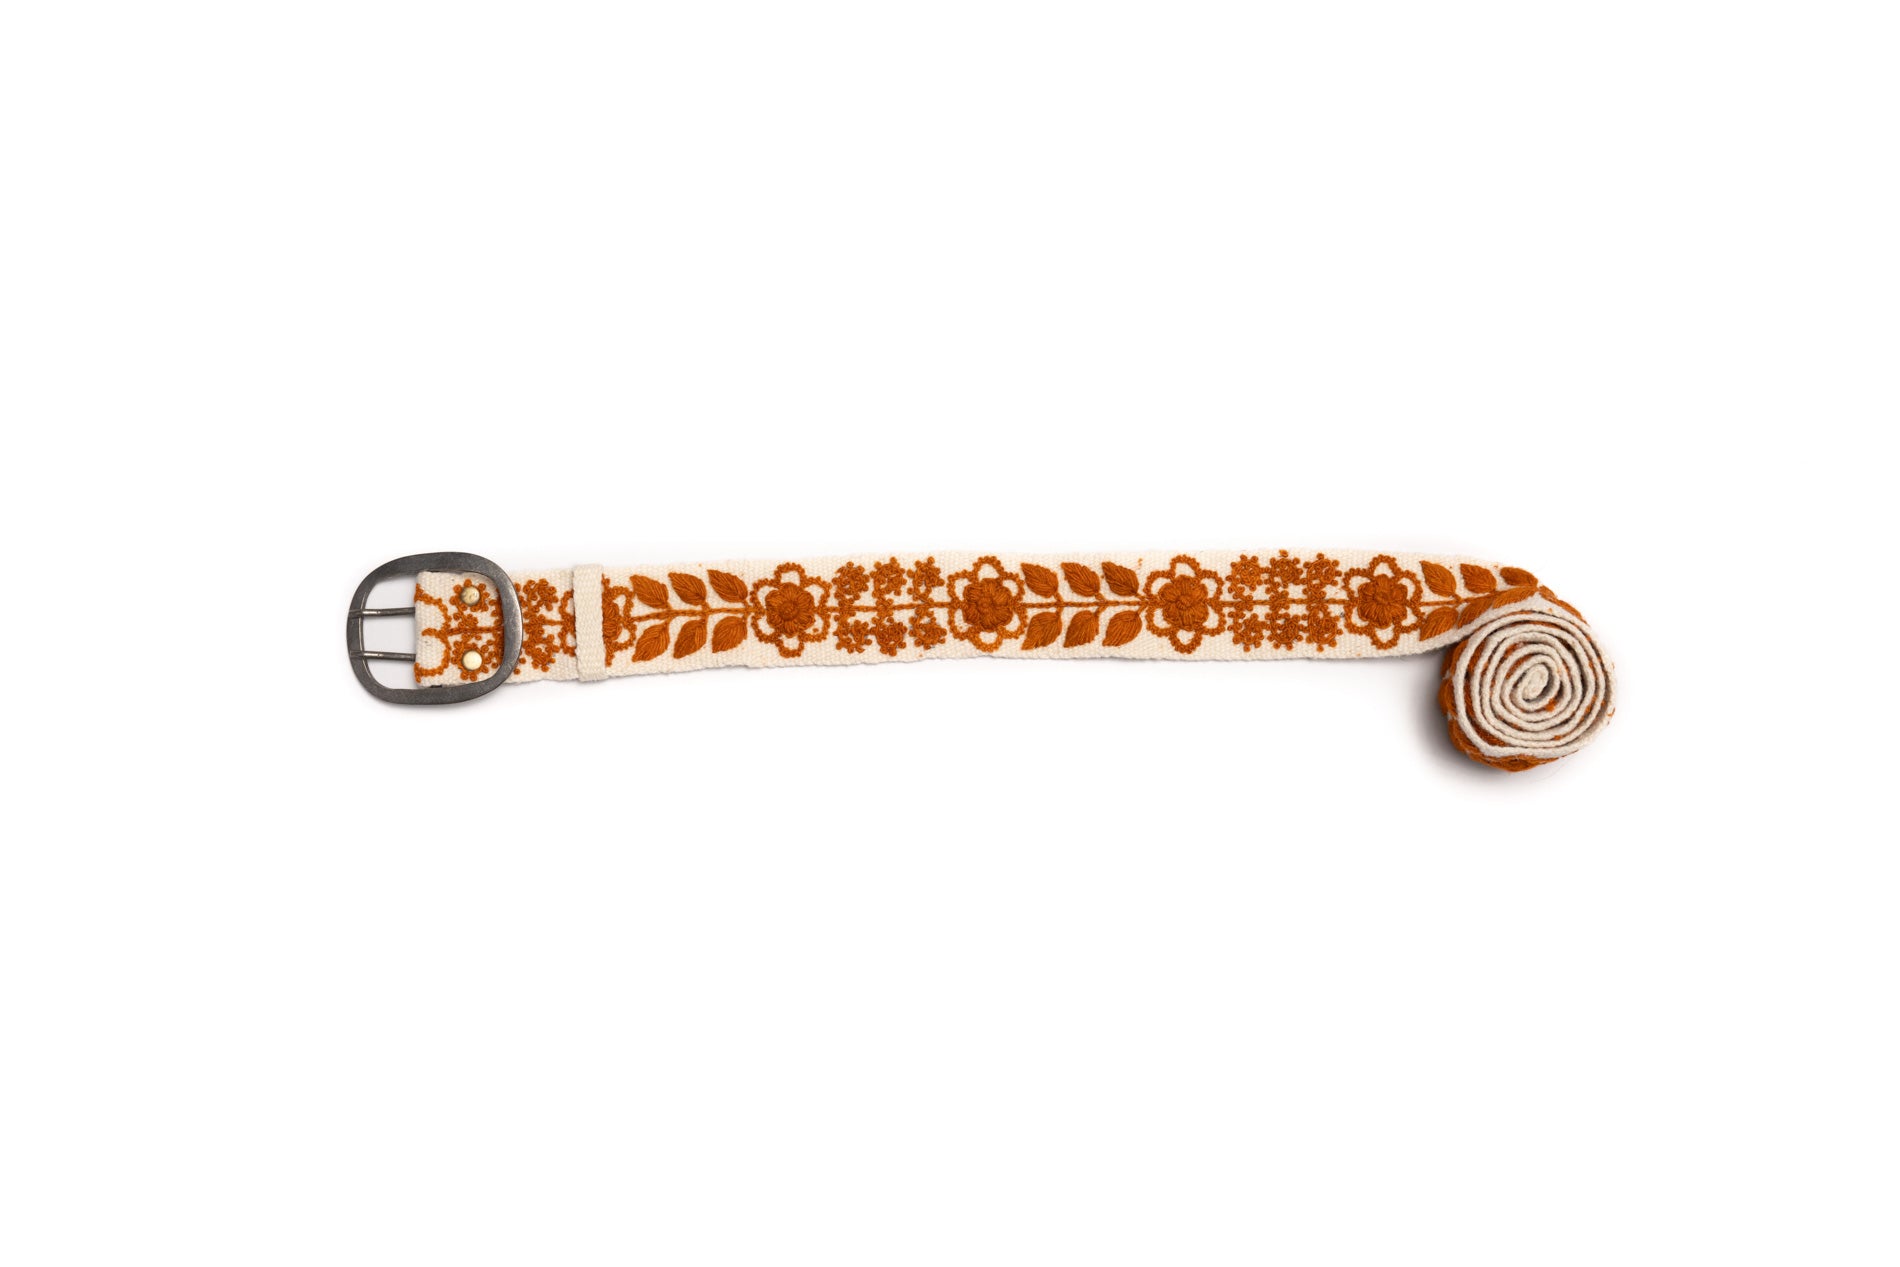 Rachel Hand Embroidered Belt with cream wool fabric, burnt orange floral and leaves